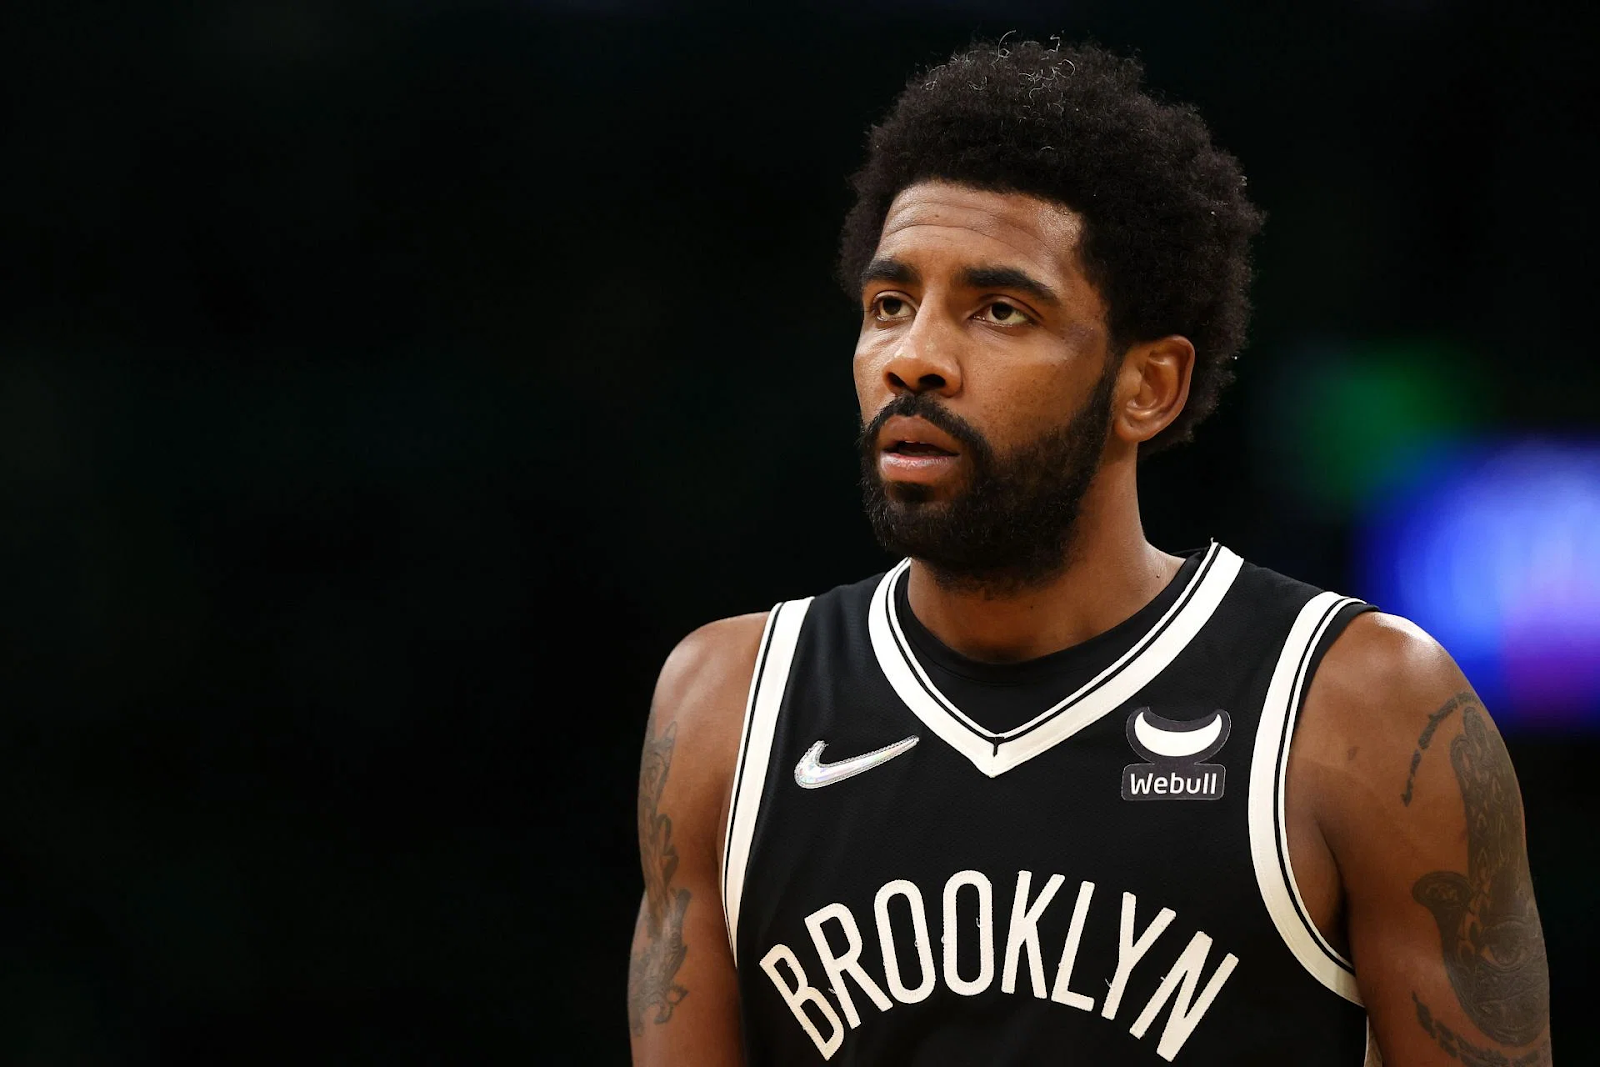 How many people would have lined up to try to land him other than the Lakers? During this offseason, no other team outside the Los Angeles Lakers has shown any interest in Kyrie Irving.